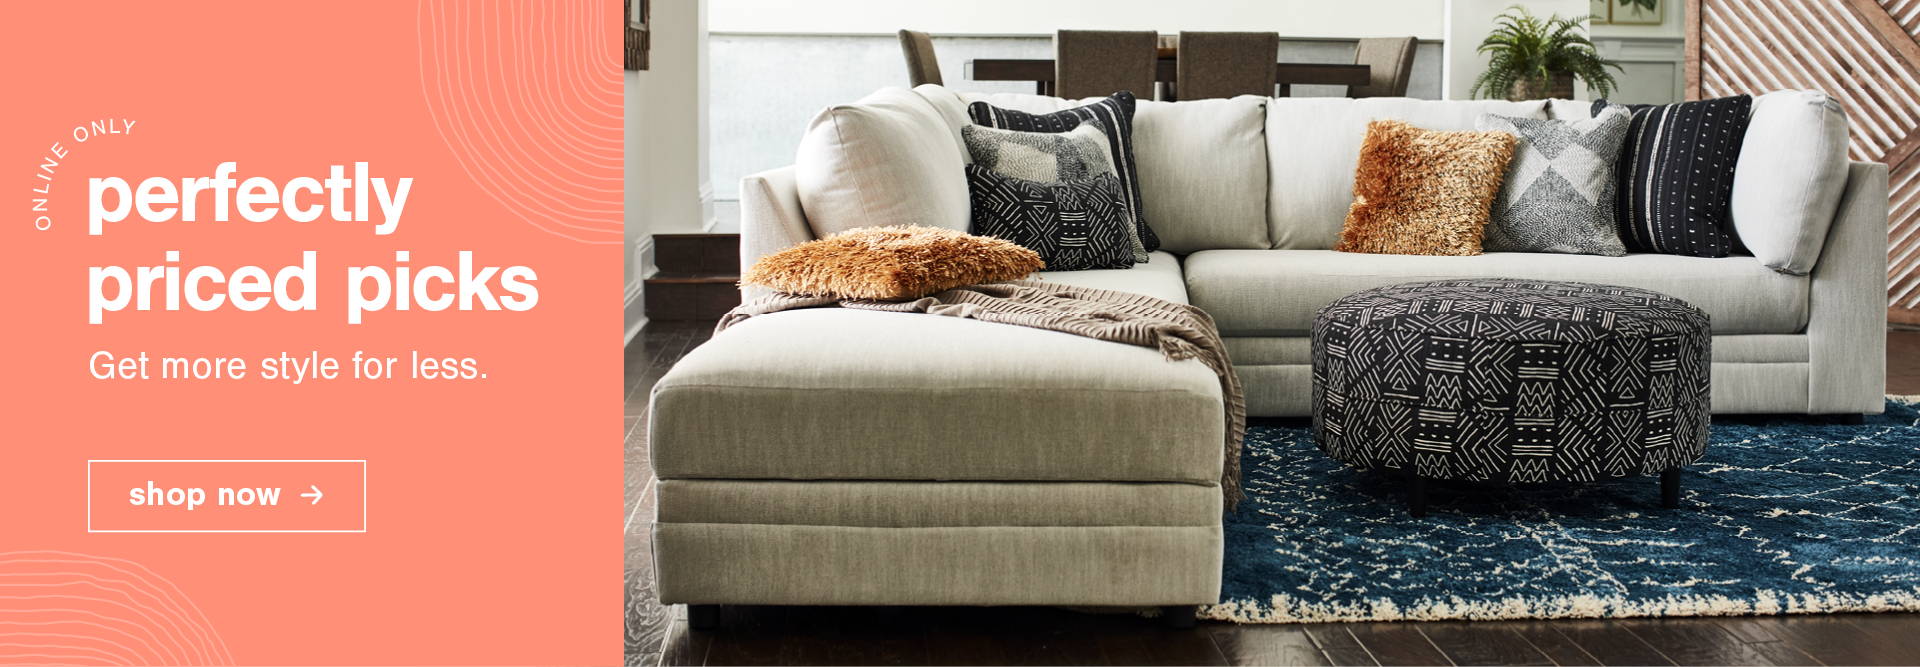 Online Only | Perfectly Priced Picks. Get More Style for Less - Shop Now - Ashley White Sectional with Black Ottoman and Pillows in Living Room  